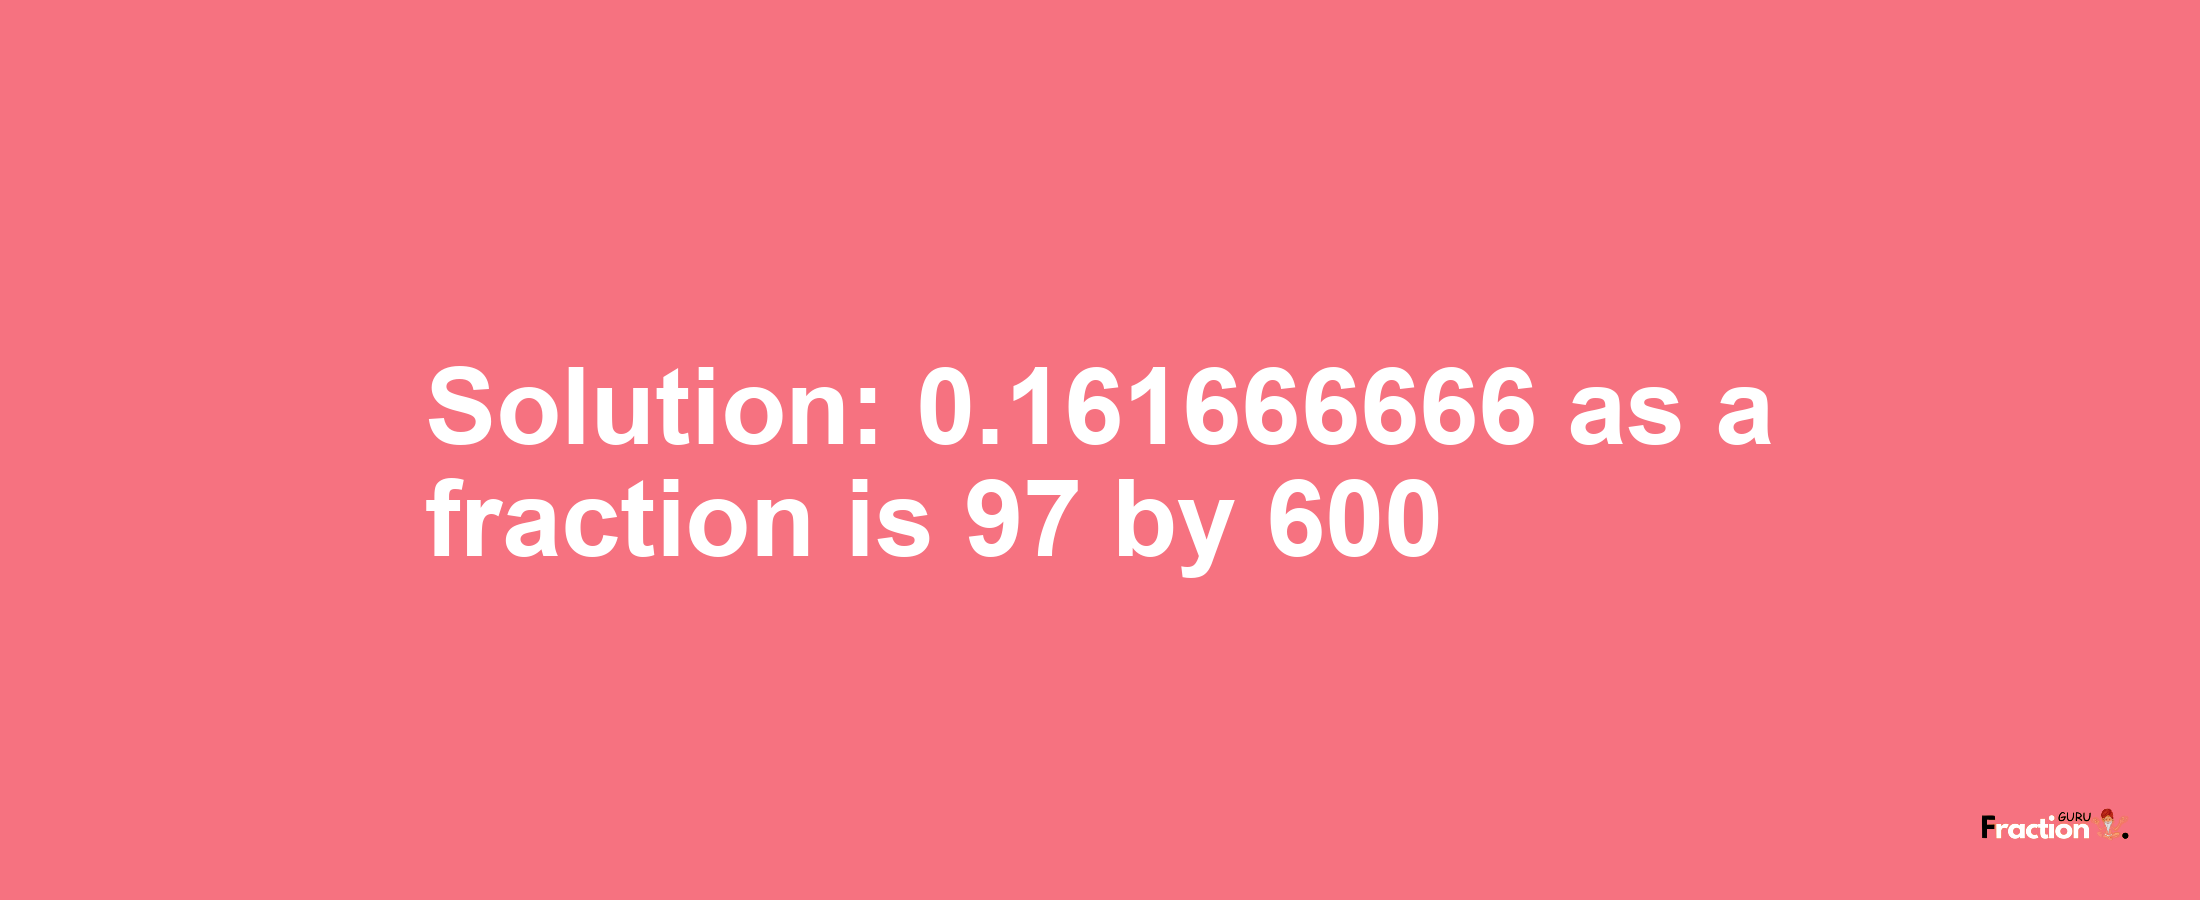 Solution:0.161666666 as a fraction is 97/600